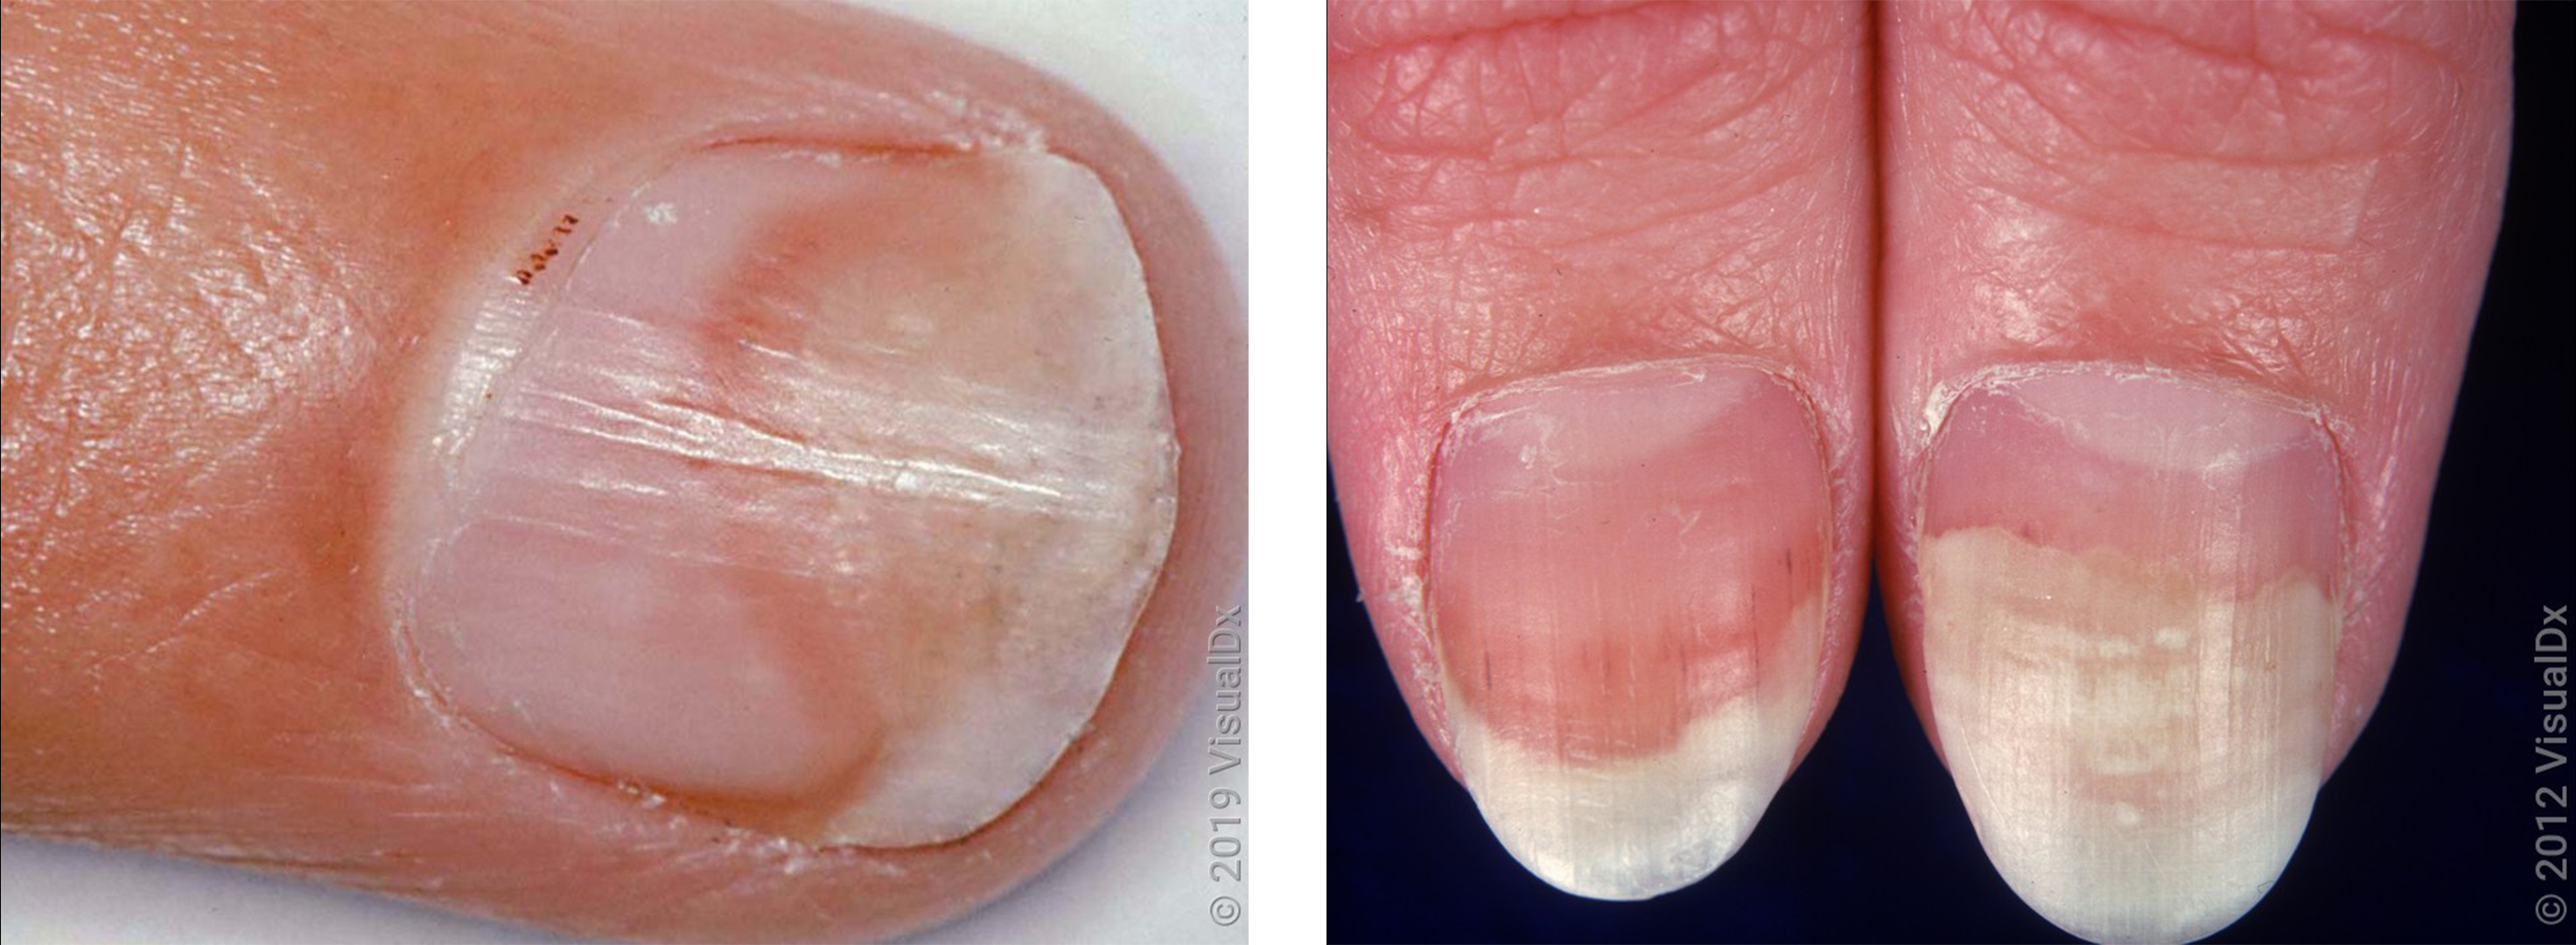 Services : Nail fungal Infections - OM Diagnostic Labs